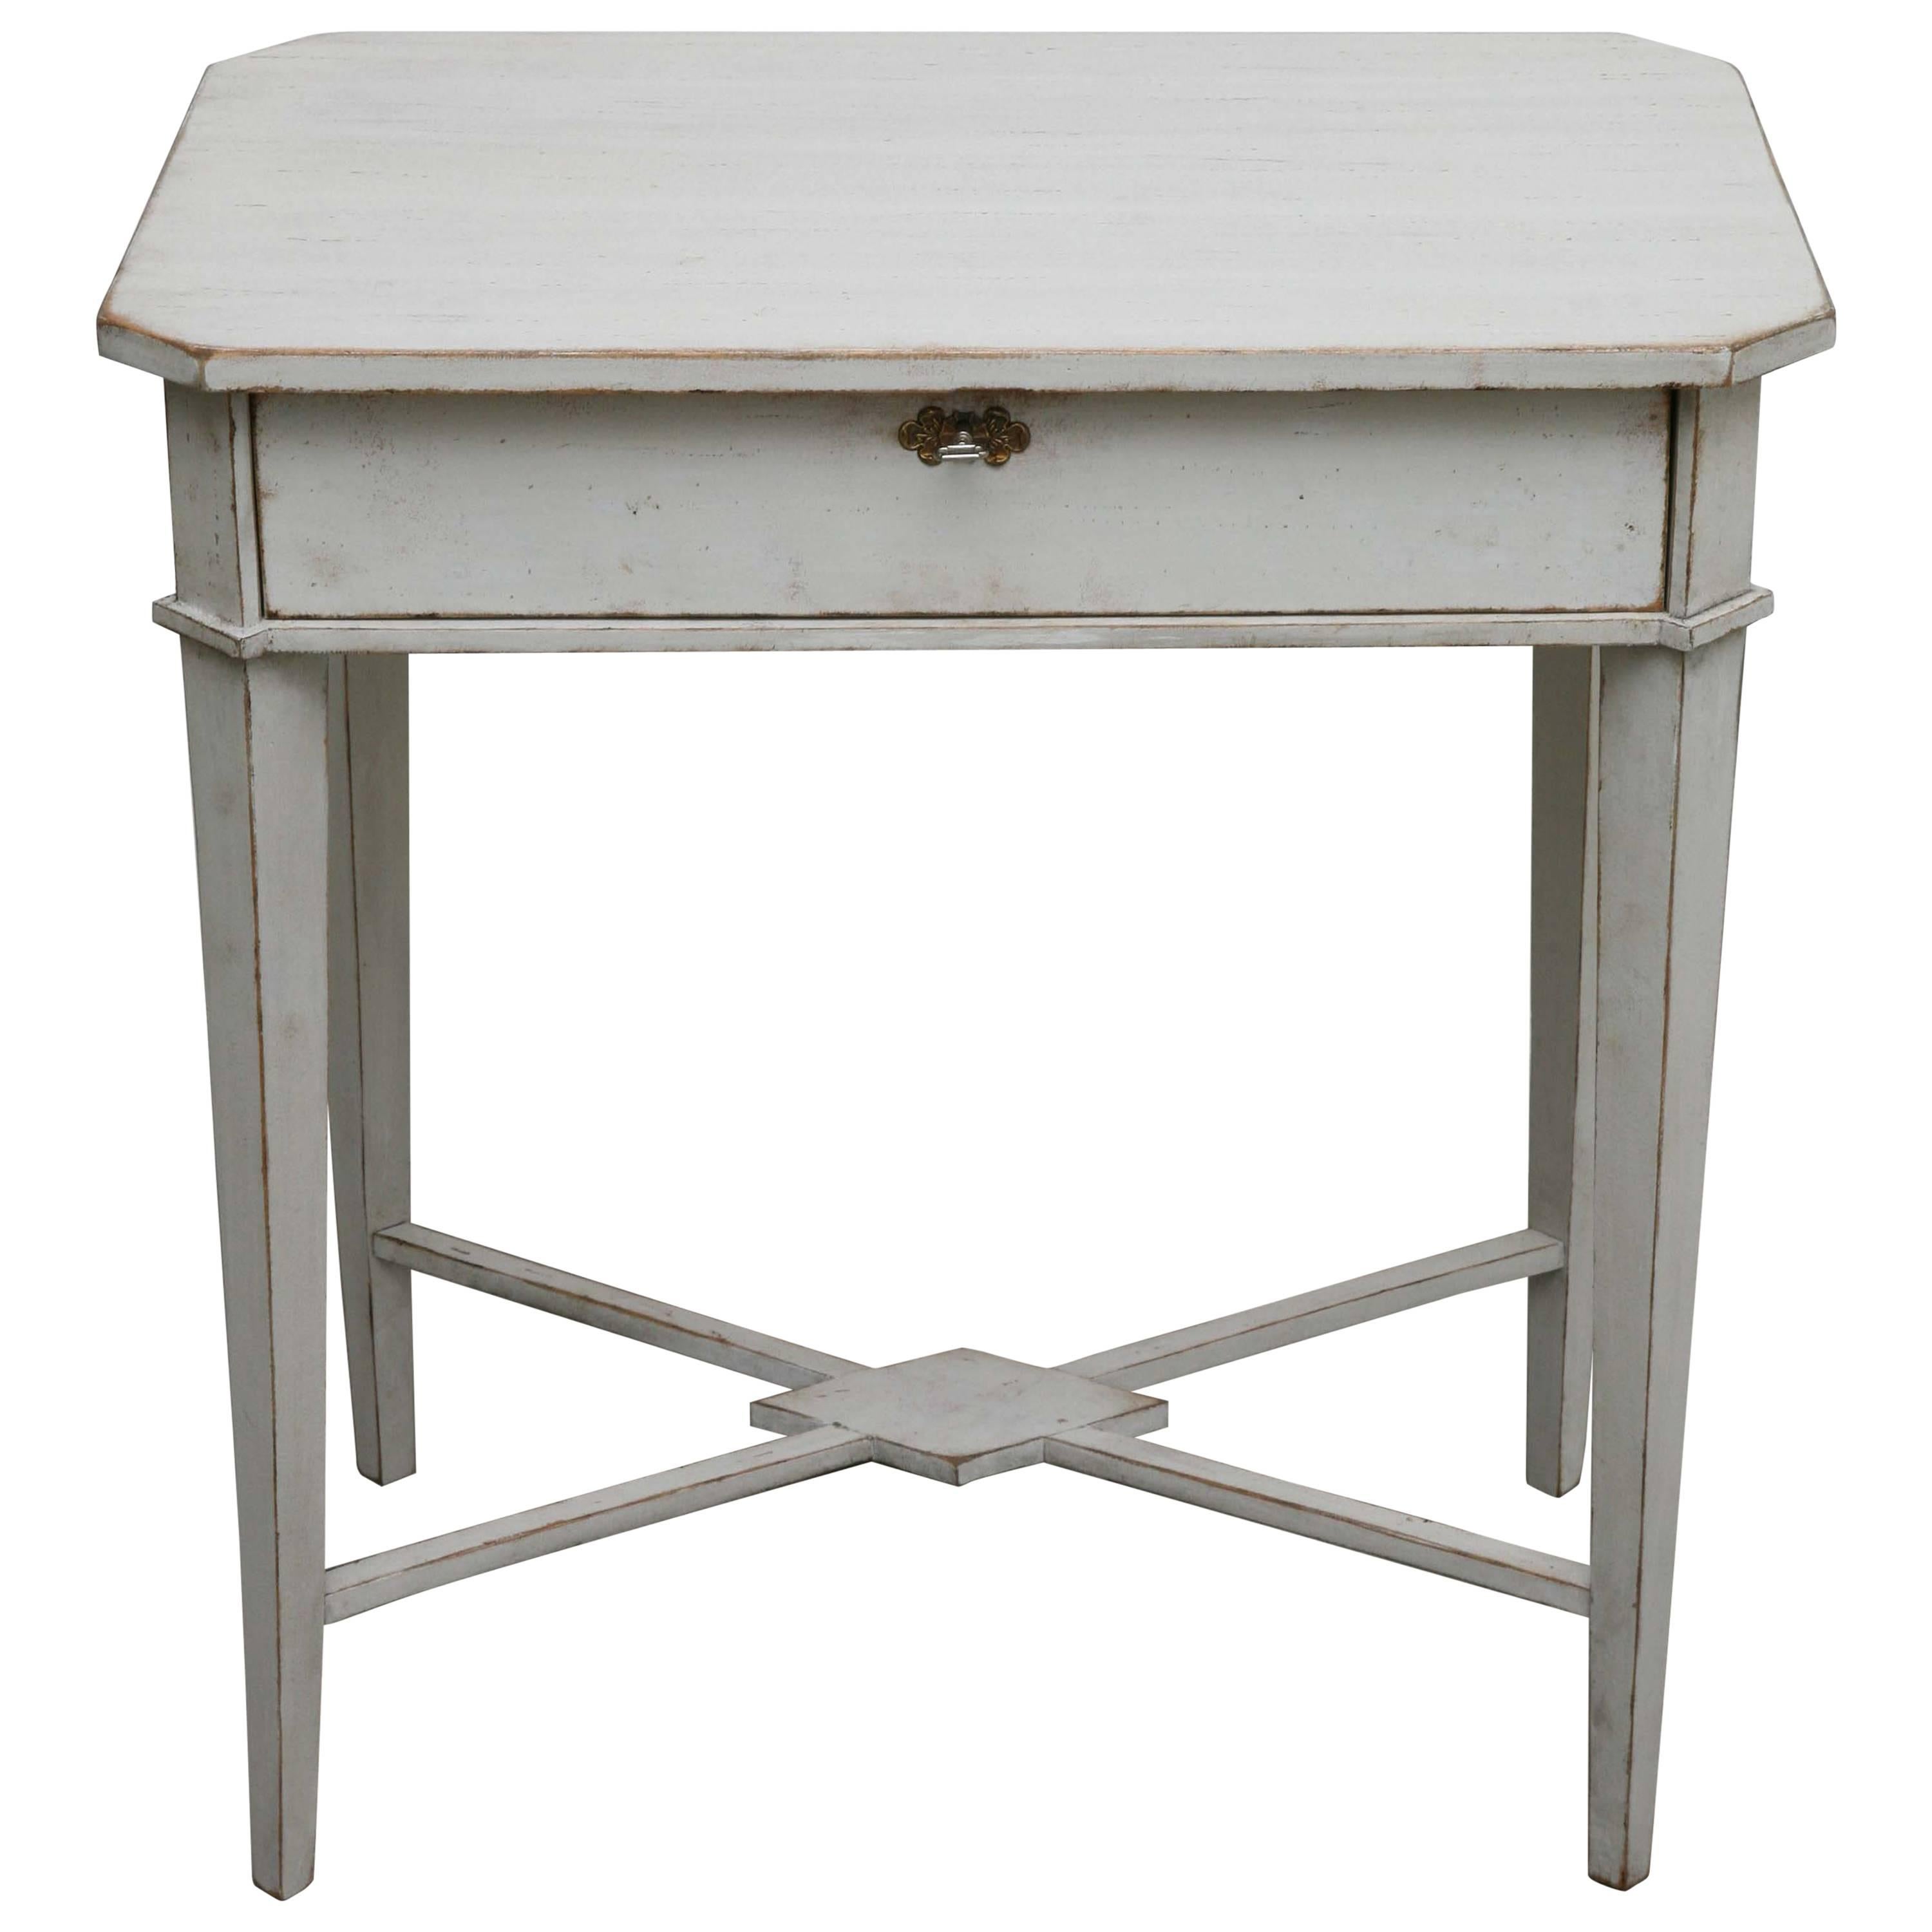 Antique Swedish Gustavian Pained Work Table, 19th Century